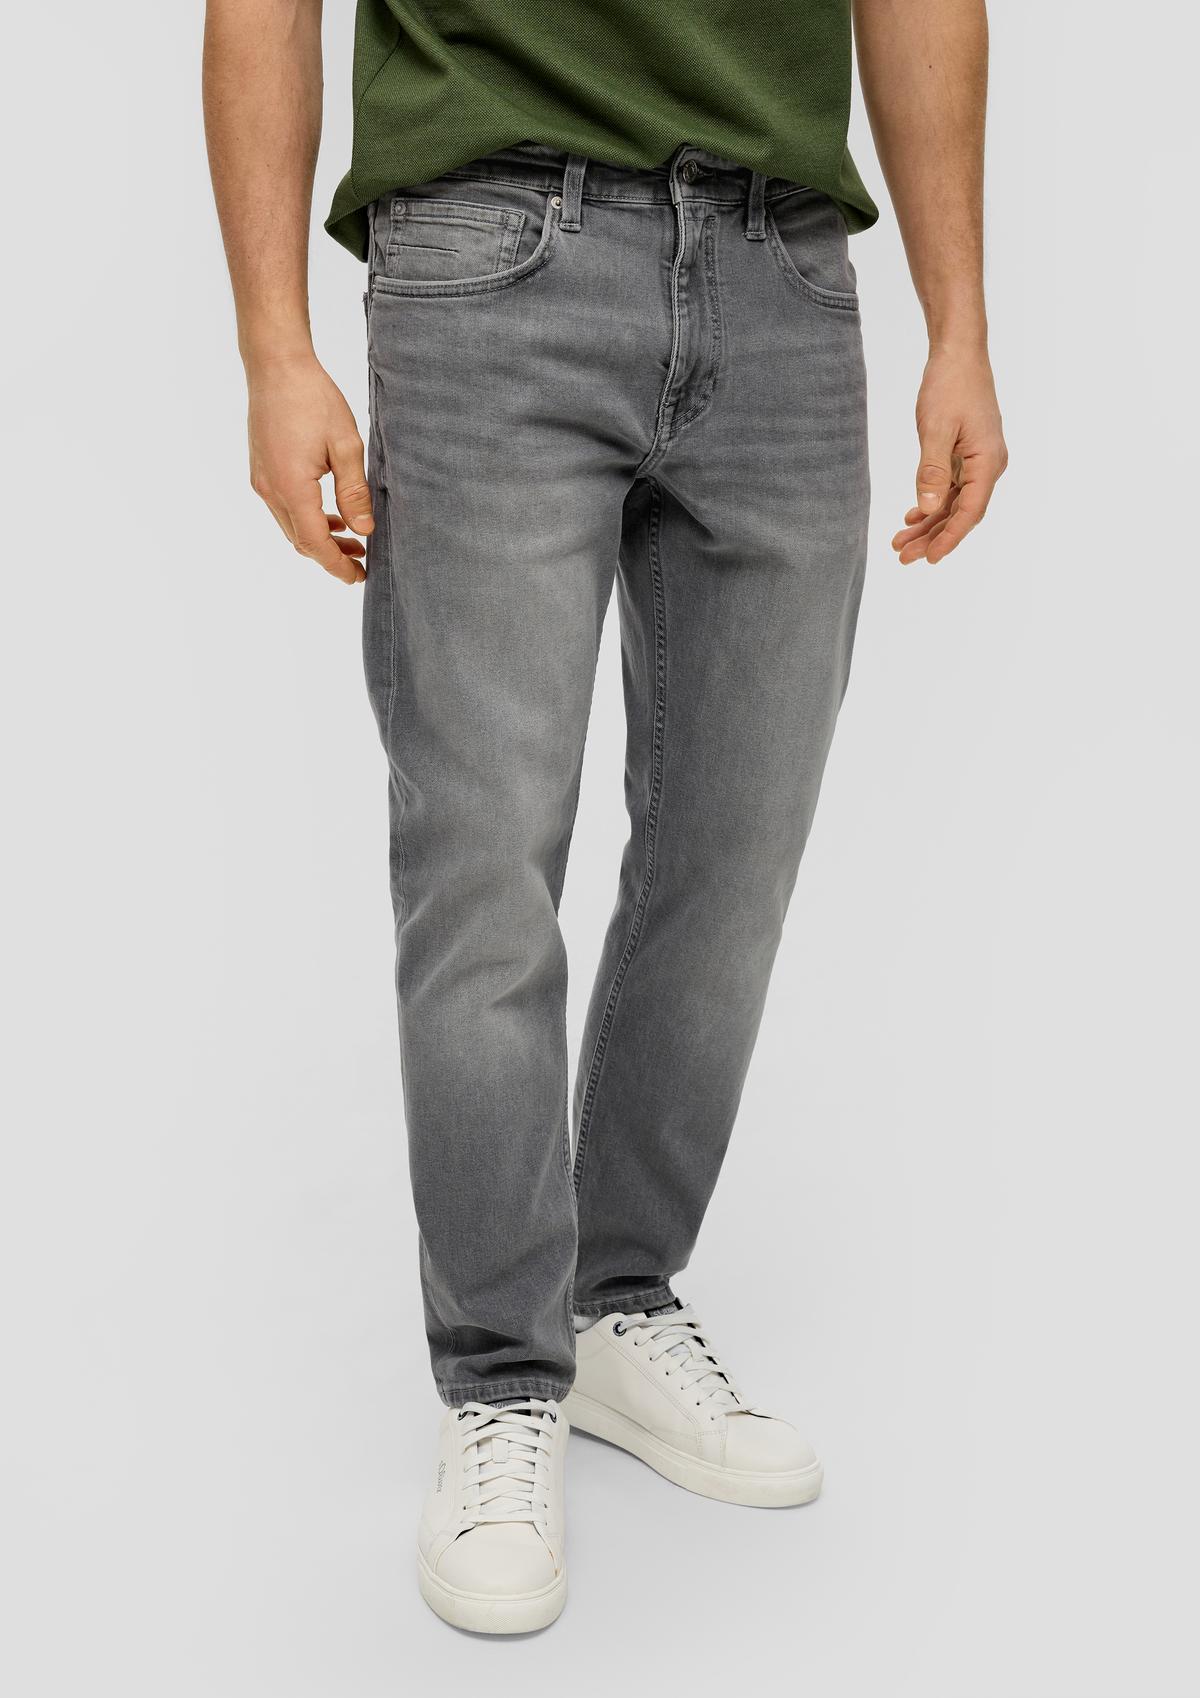 s.Oliver Jeans Mauro / regular fit / mid rise / tapered leg